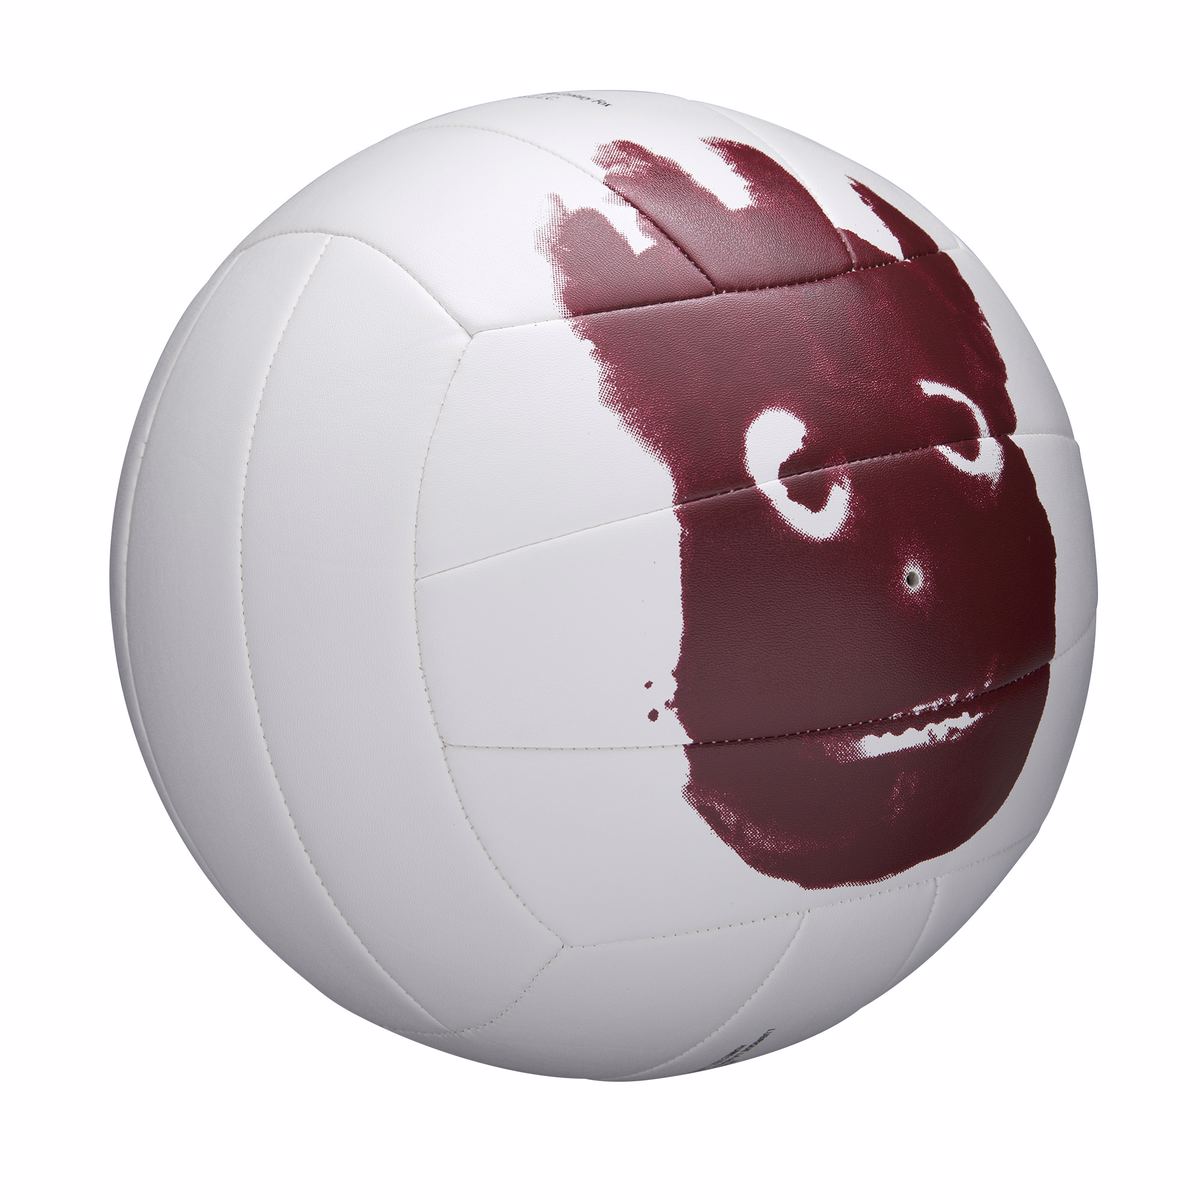 WTH4615X_9_OF_Cast_Away_Ball_WH.png.high-res_1200x1200